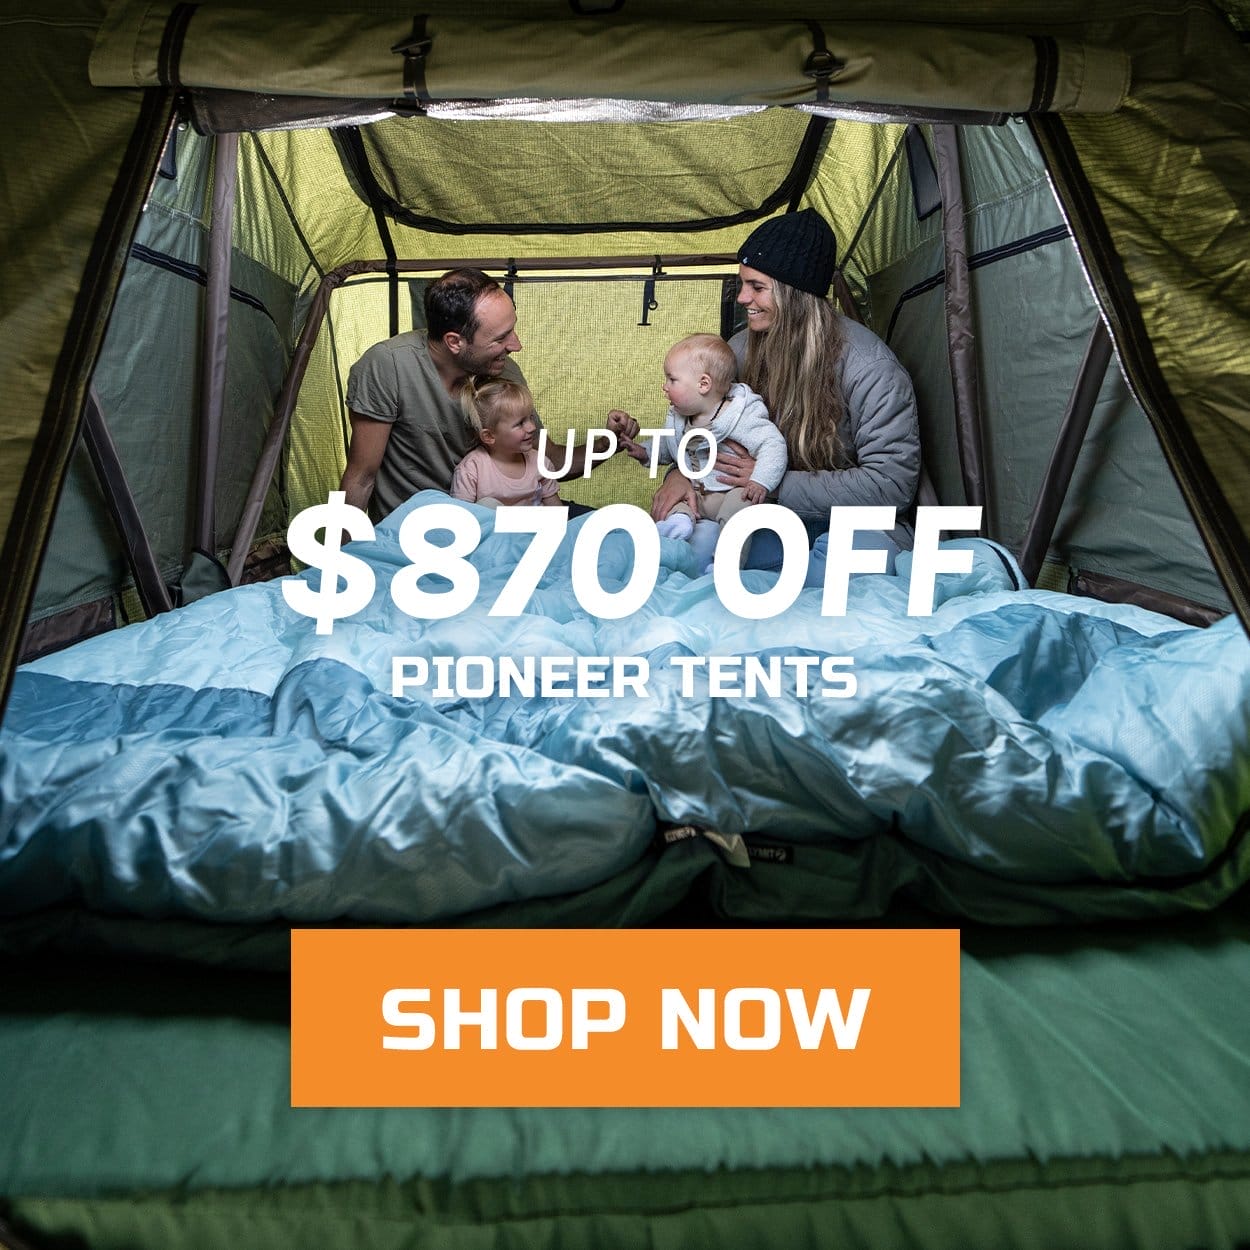 Up to \\$870 off Pioneer Tents